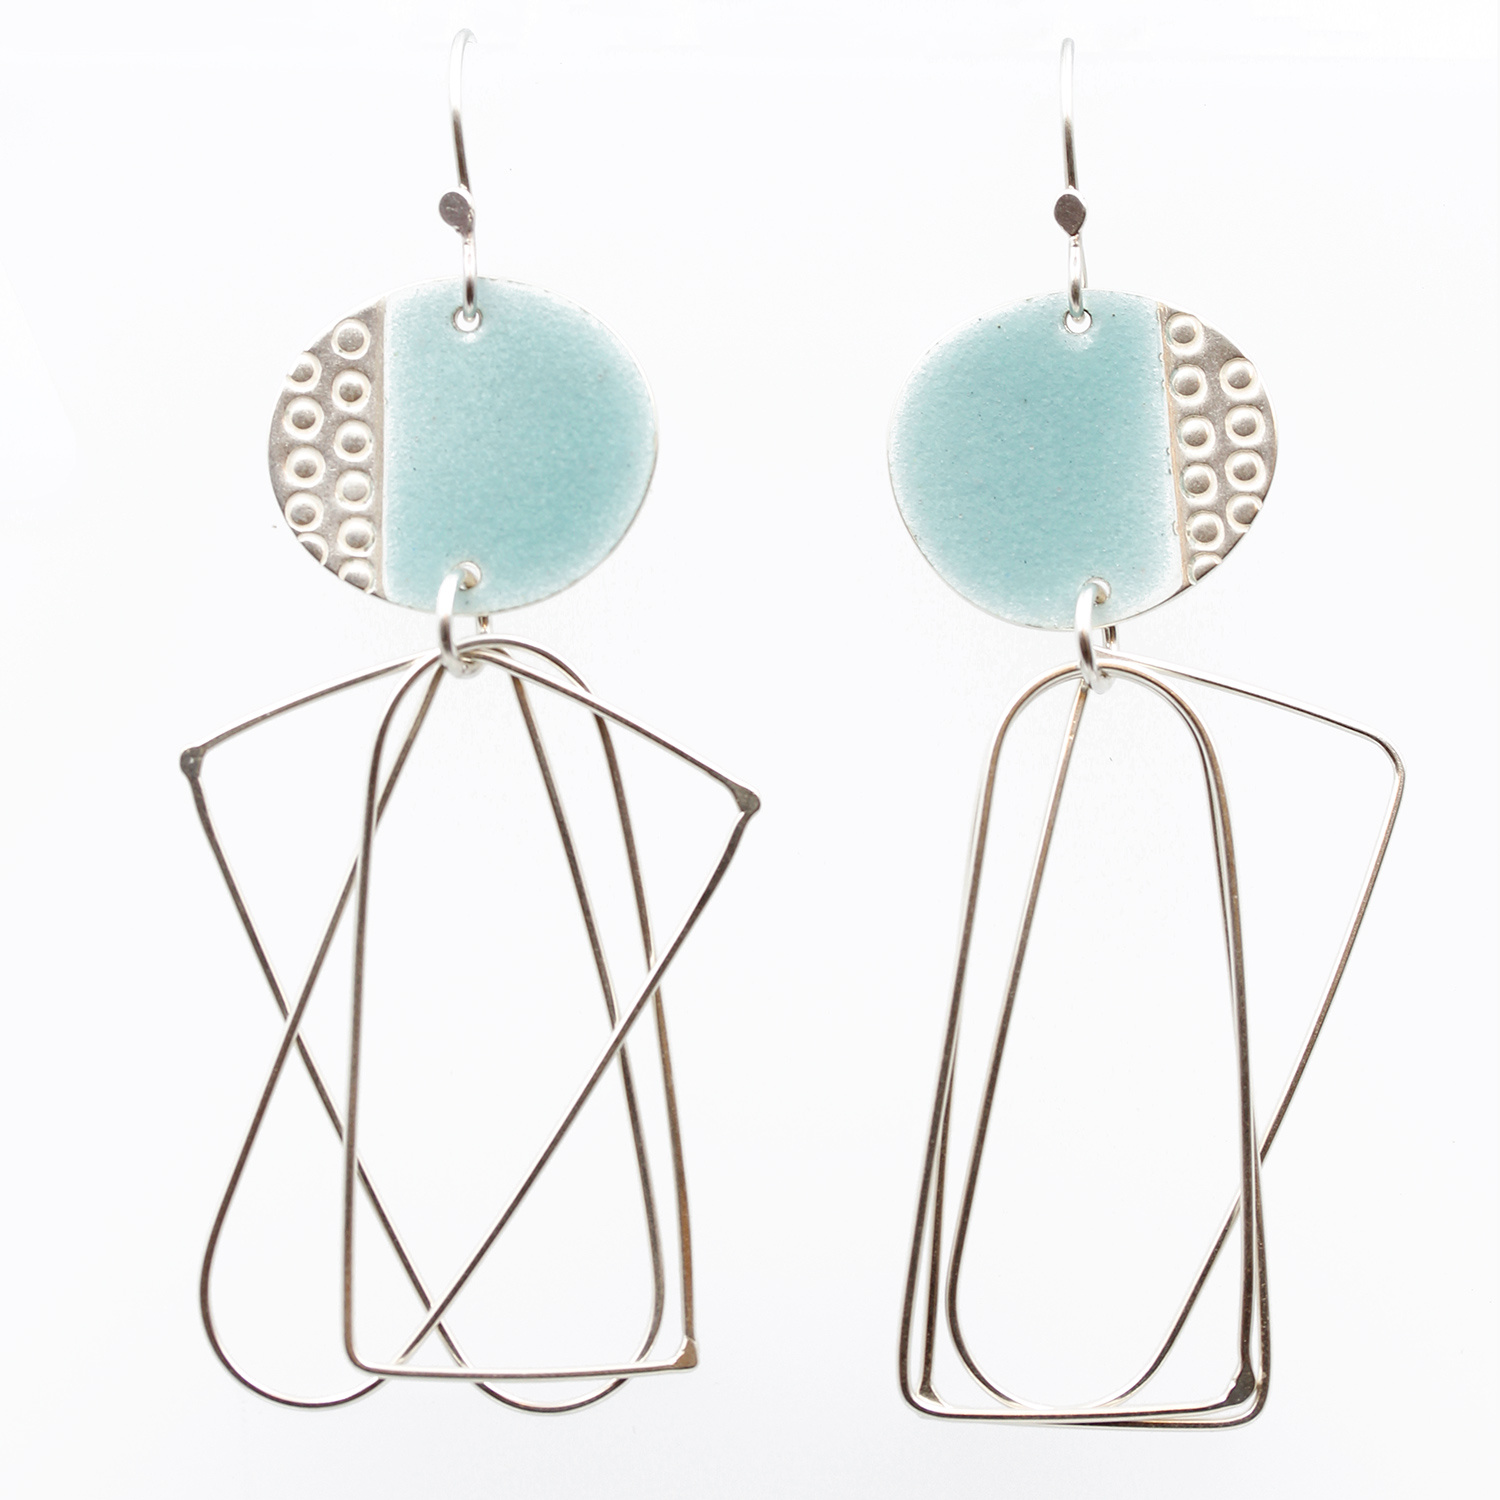 Island Earrings with Arch Loops by Caroline Finlay